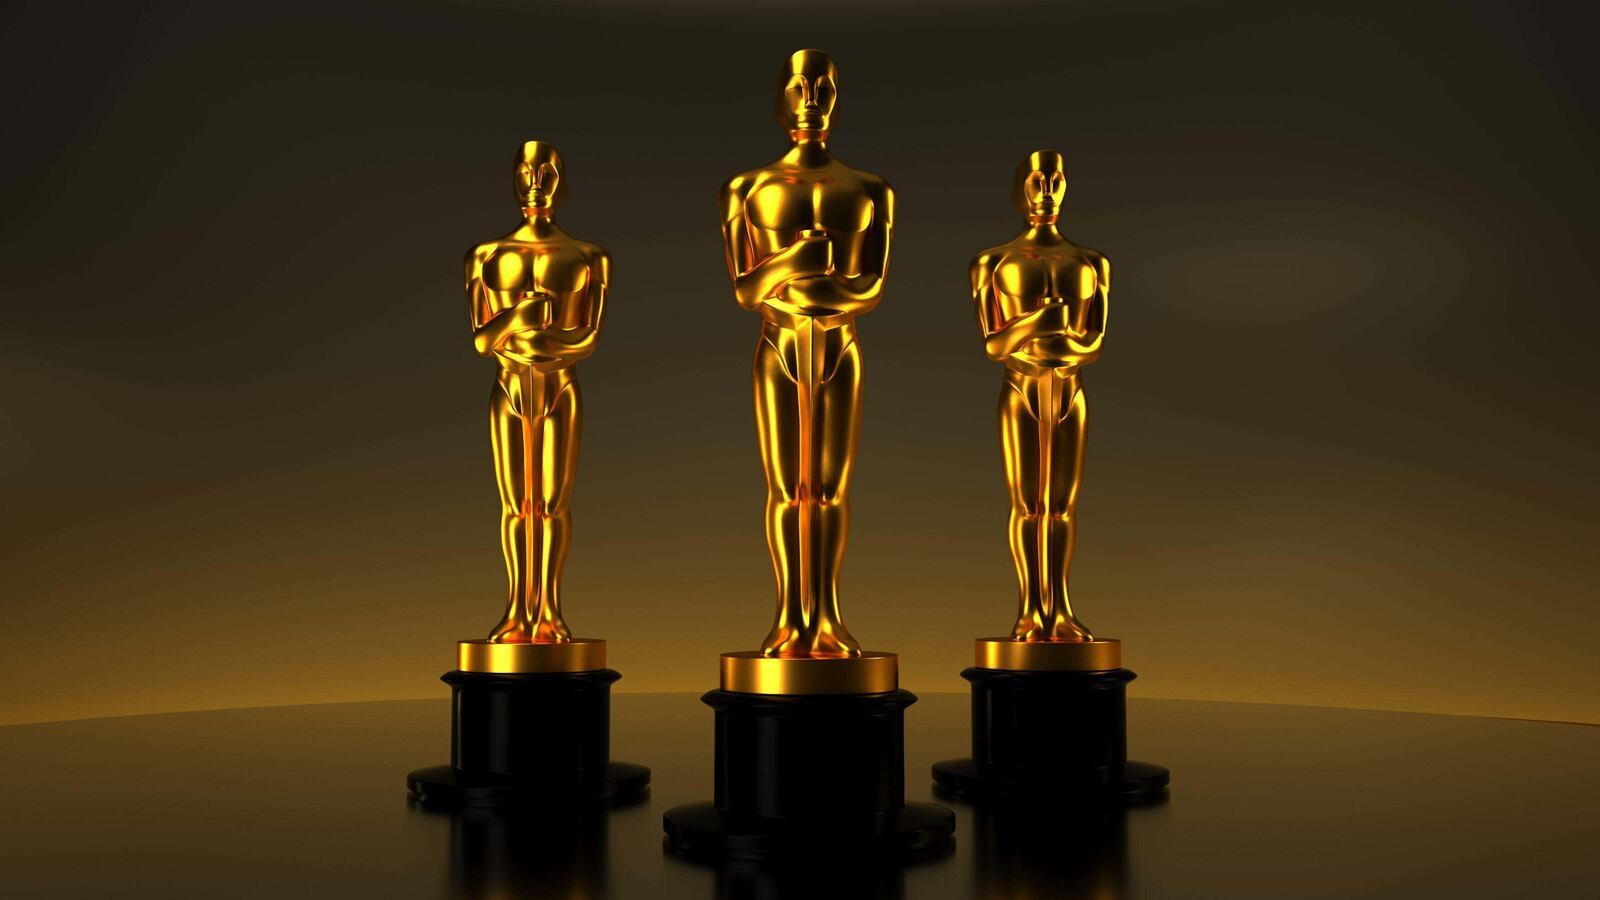 A photo of three Academy Award statuettes